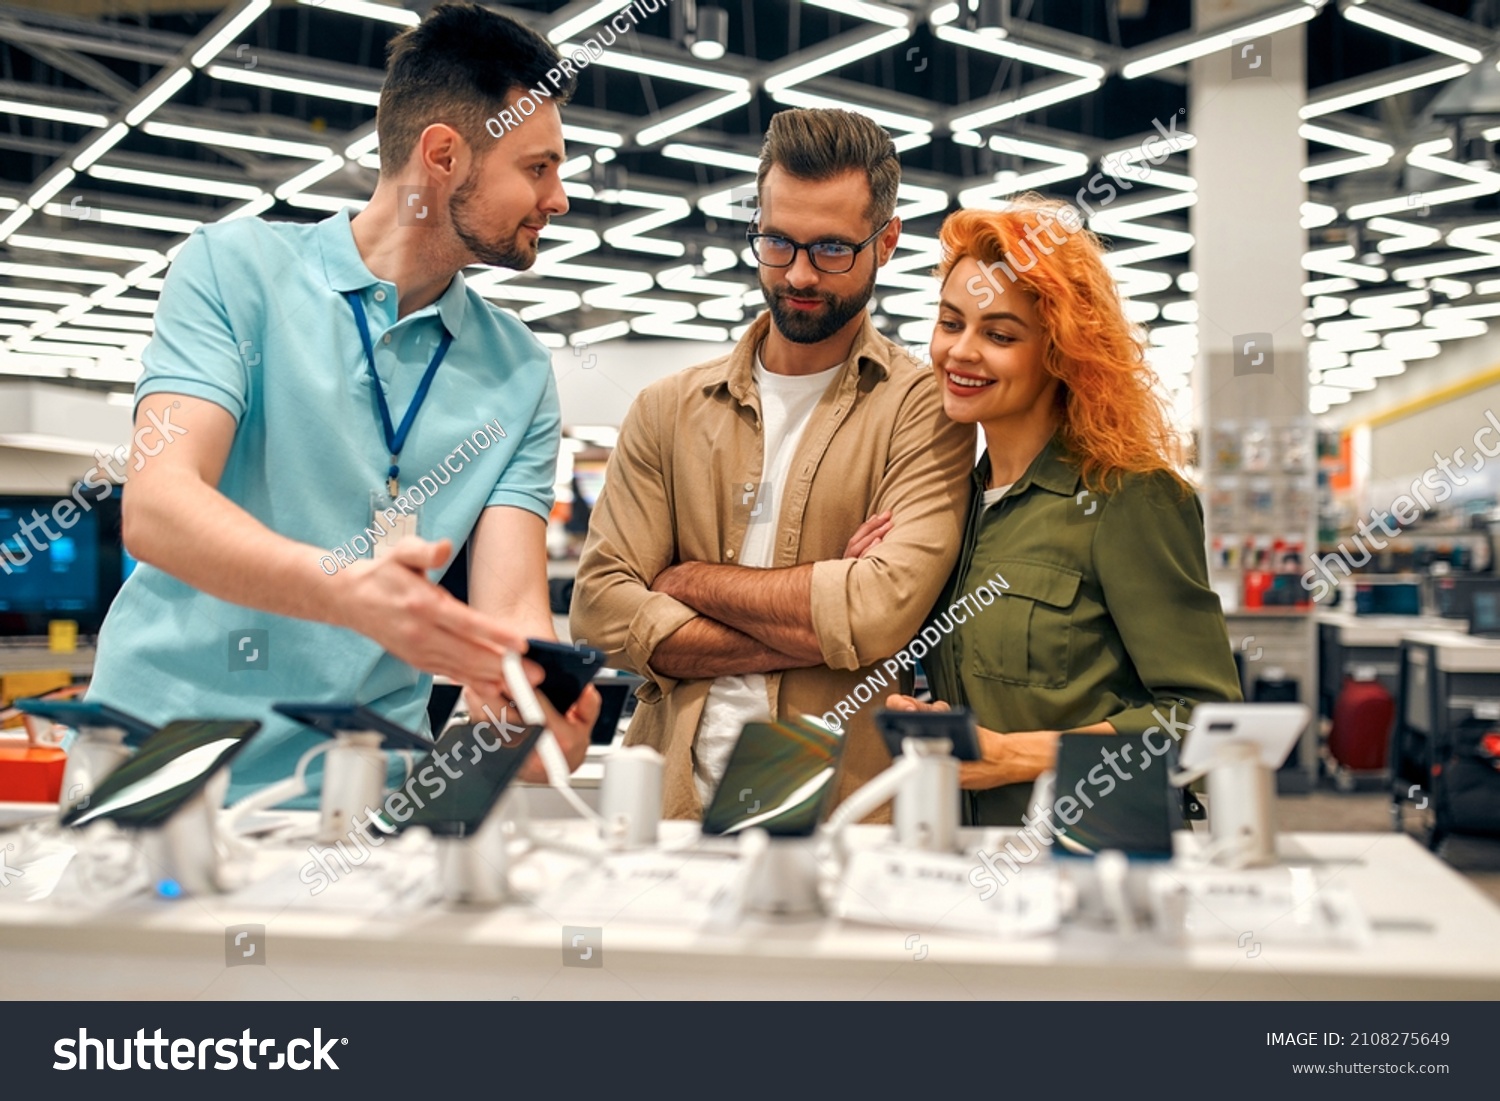 Red-haired sweet woman, along with her boyfriend, chooses new smartphone in store of household appliances, electronics and gadgets, getting help from store consultant. #2108275649